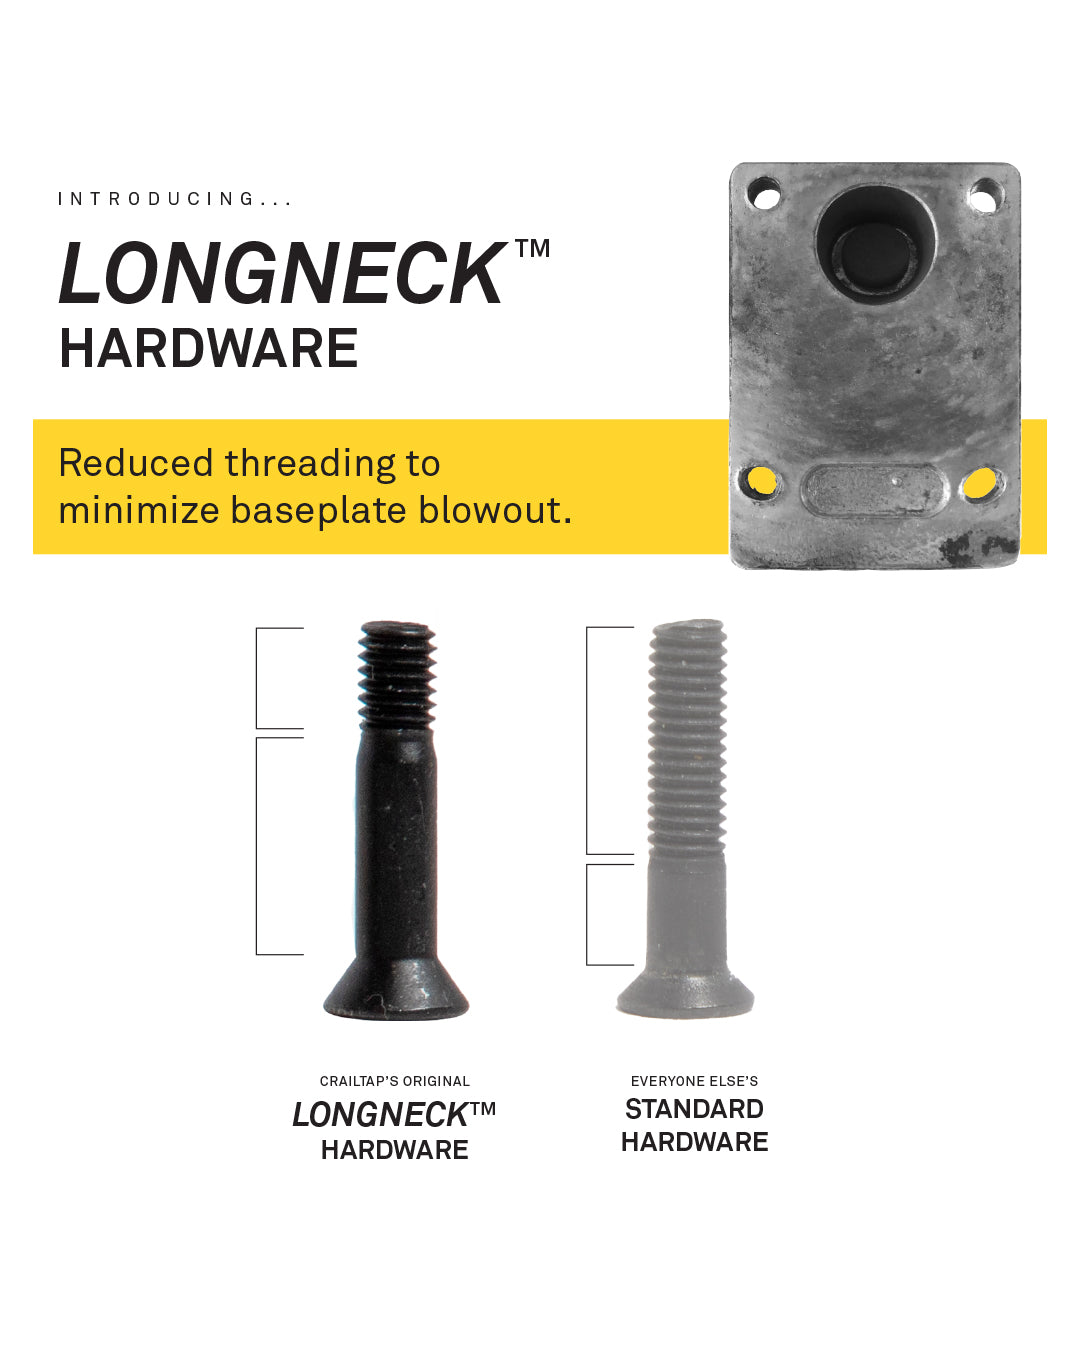 long neck hardware - reduced threading to minimize baseplate blowout